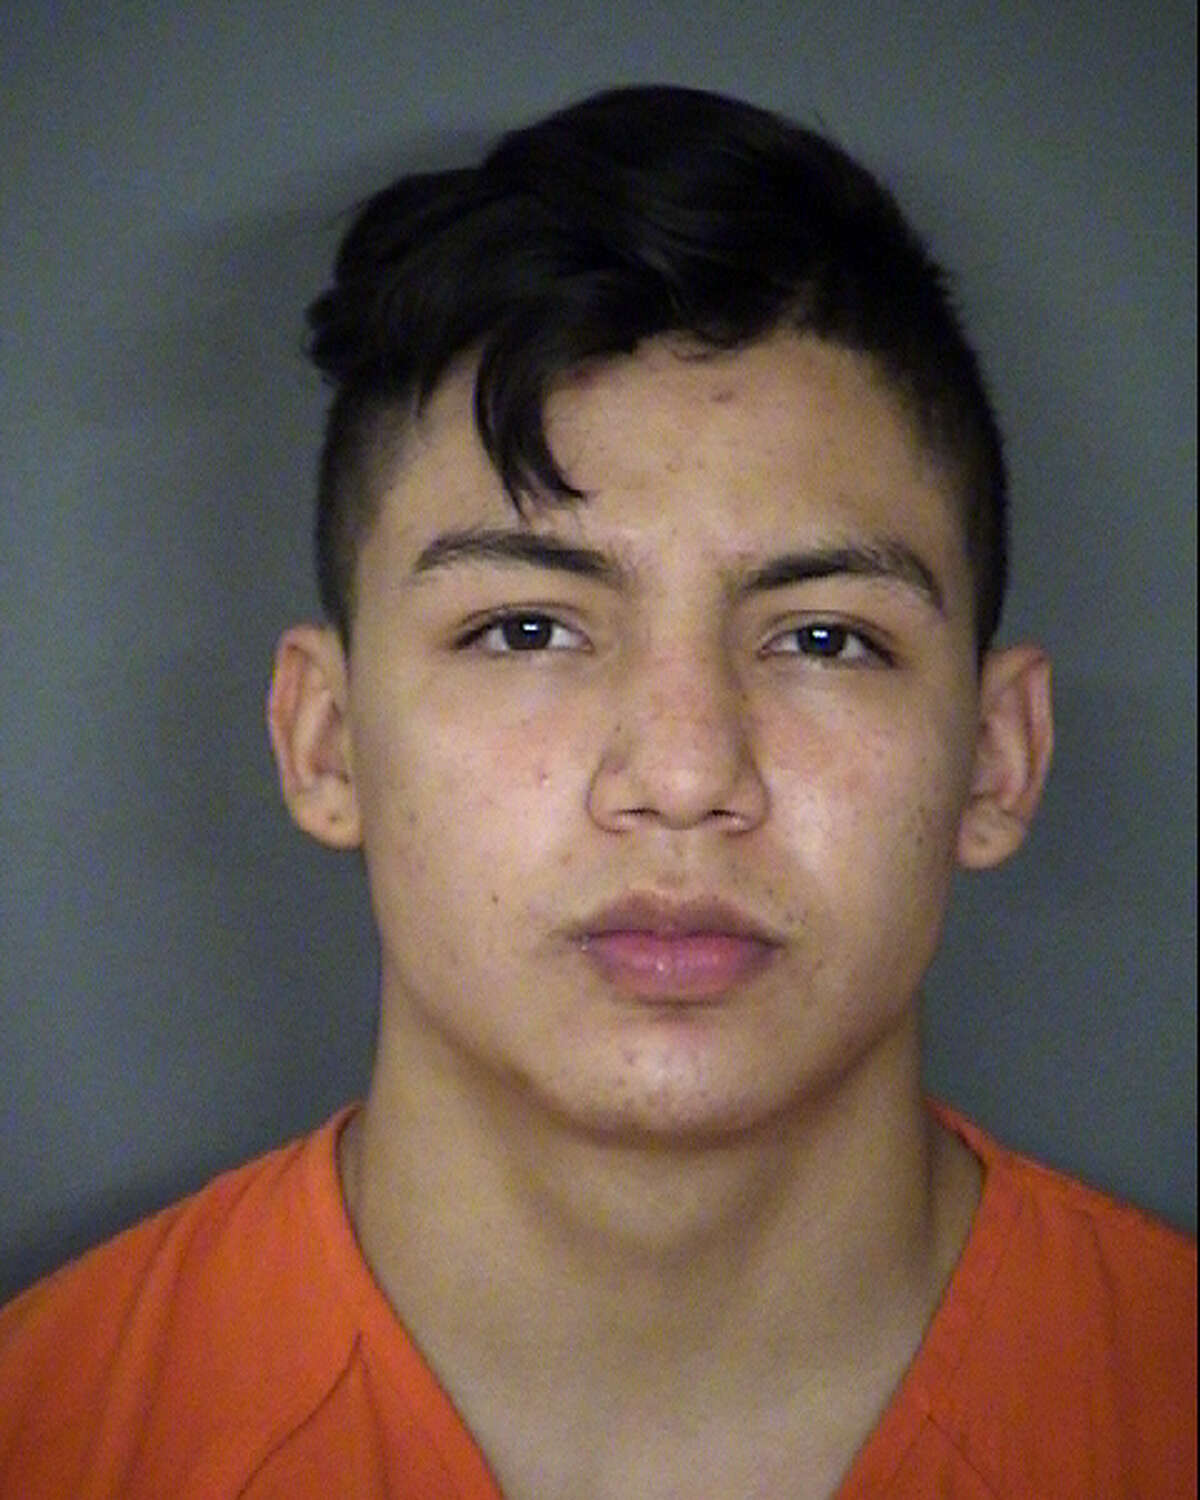 Patrick Cesar Gomez, 17, faces a charge of aggravated assault with a deadly weapon. He remains in the Bexar County Jail on a $75,000 bond.